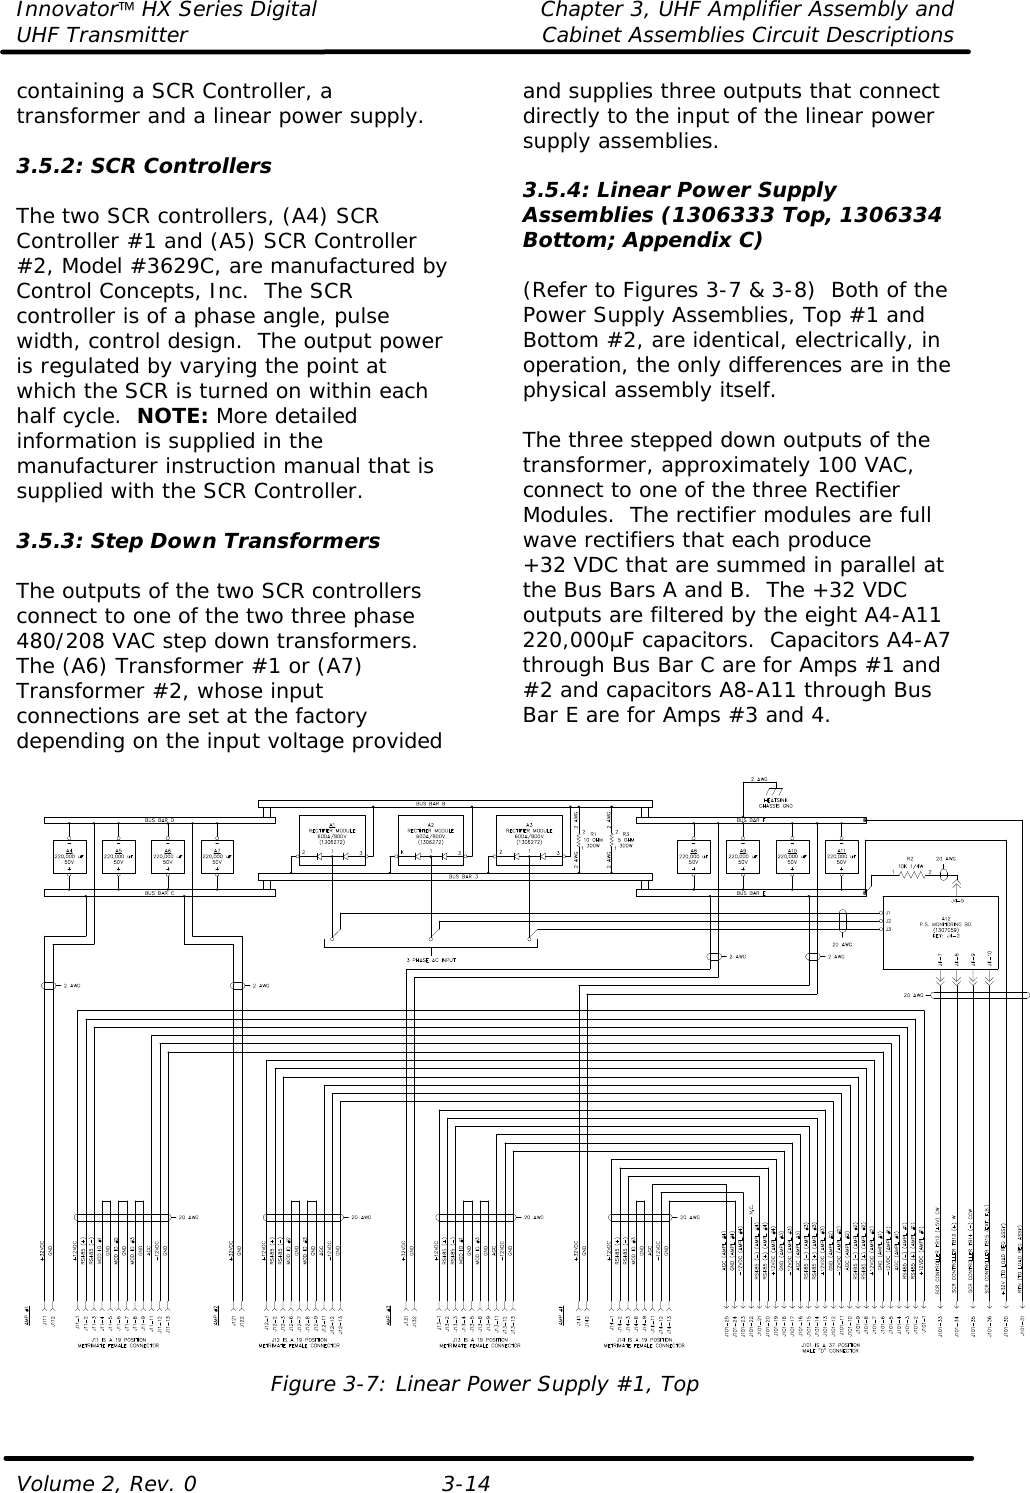 Innovator HX Series Digital Chapter 3, UHF Amplifier Assembly and UHF Transmitter Cabinet Assemblies Circuit Descriptions  Volume 2, Rev. 0 3-14 containing a SCR Controller, a transformer and a linear power supply.    3.5.2: SCR Controllers  The two SCR controllers, (A4) SCR Controller #1 and (A5) SCR Controller #2, Model #3629C, are manufactured by Control Concepts, Inc.  The SCR controller is of a phase angle, pulse width, control design.  The output power is regulated by varying the point at which the SCR is turned on within each half cycle.  NOTE: More detailed information is supplied in the manufacturer instruction manual that is supplied with the SCR Controller.  3.5.3: Step Down Transformers  The outputs of the two SCR controllers connect to one of the two three phase 480/208 VAC step down transformers.  The (A6) Transformer #1 or (A7) Transformer #2, whose input connections are set at the factory depending on the input voltage provided and supplies three outputs that connect directly to the input of the linear power supply assemblies.    3.5.4: Linear Power Supply Assemblies (1306333 Top, 1306334 Bottom; Appendix C)  (Refer to Figures 3-7 &amp; 3-8)  Both of the Power Supply Assemblies, Top #1 and Bottom #2, are identical, electrically, in operation, the only differences are in the physical assembly itself.  The three stepped down outputs of the transformer, approximately 100 VAC, connect to one of the three Rectifier Modules.  The rectifier modules are full wave rectifiers that each produce +32 VDC that are summed in parallel at the Bus Bars A and B.  The +32 VDC outputs are filtered by the eight A4-A11 220,000µF capacitors.  Capacitors A4-A7 through Bus Bar C are for Amps #1 and #2 and capacitors A8-A11 through Bus Bar E are for Amps #3 and 4.    Figure 3-7: Linear Power Supply #1, Top 